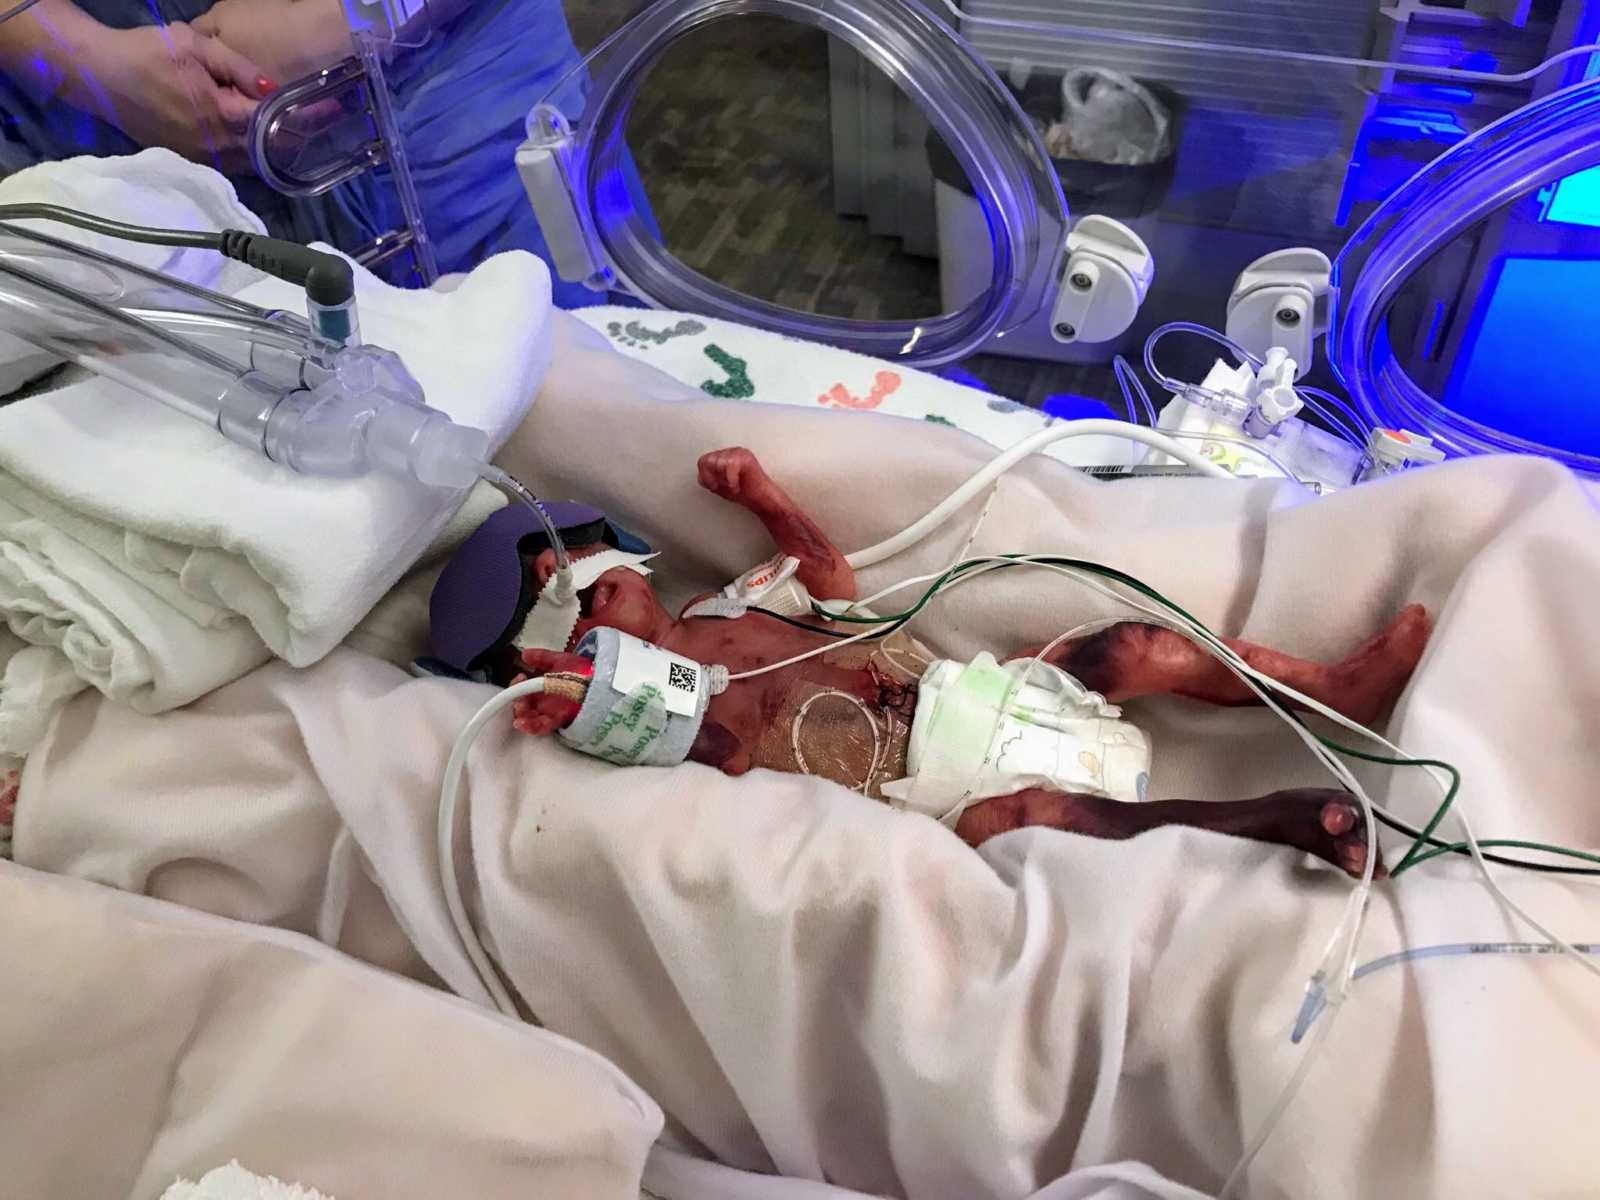 Preemie 1 pound baby in NICU with oxygen on mouth and wires attached to her body